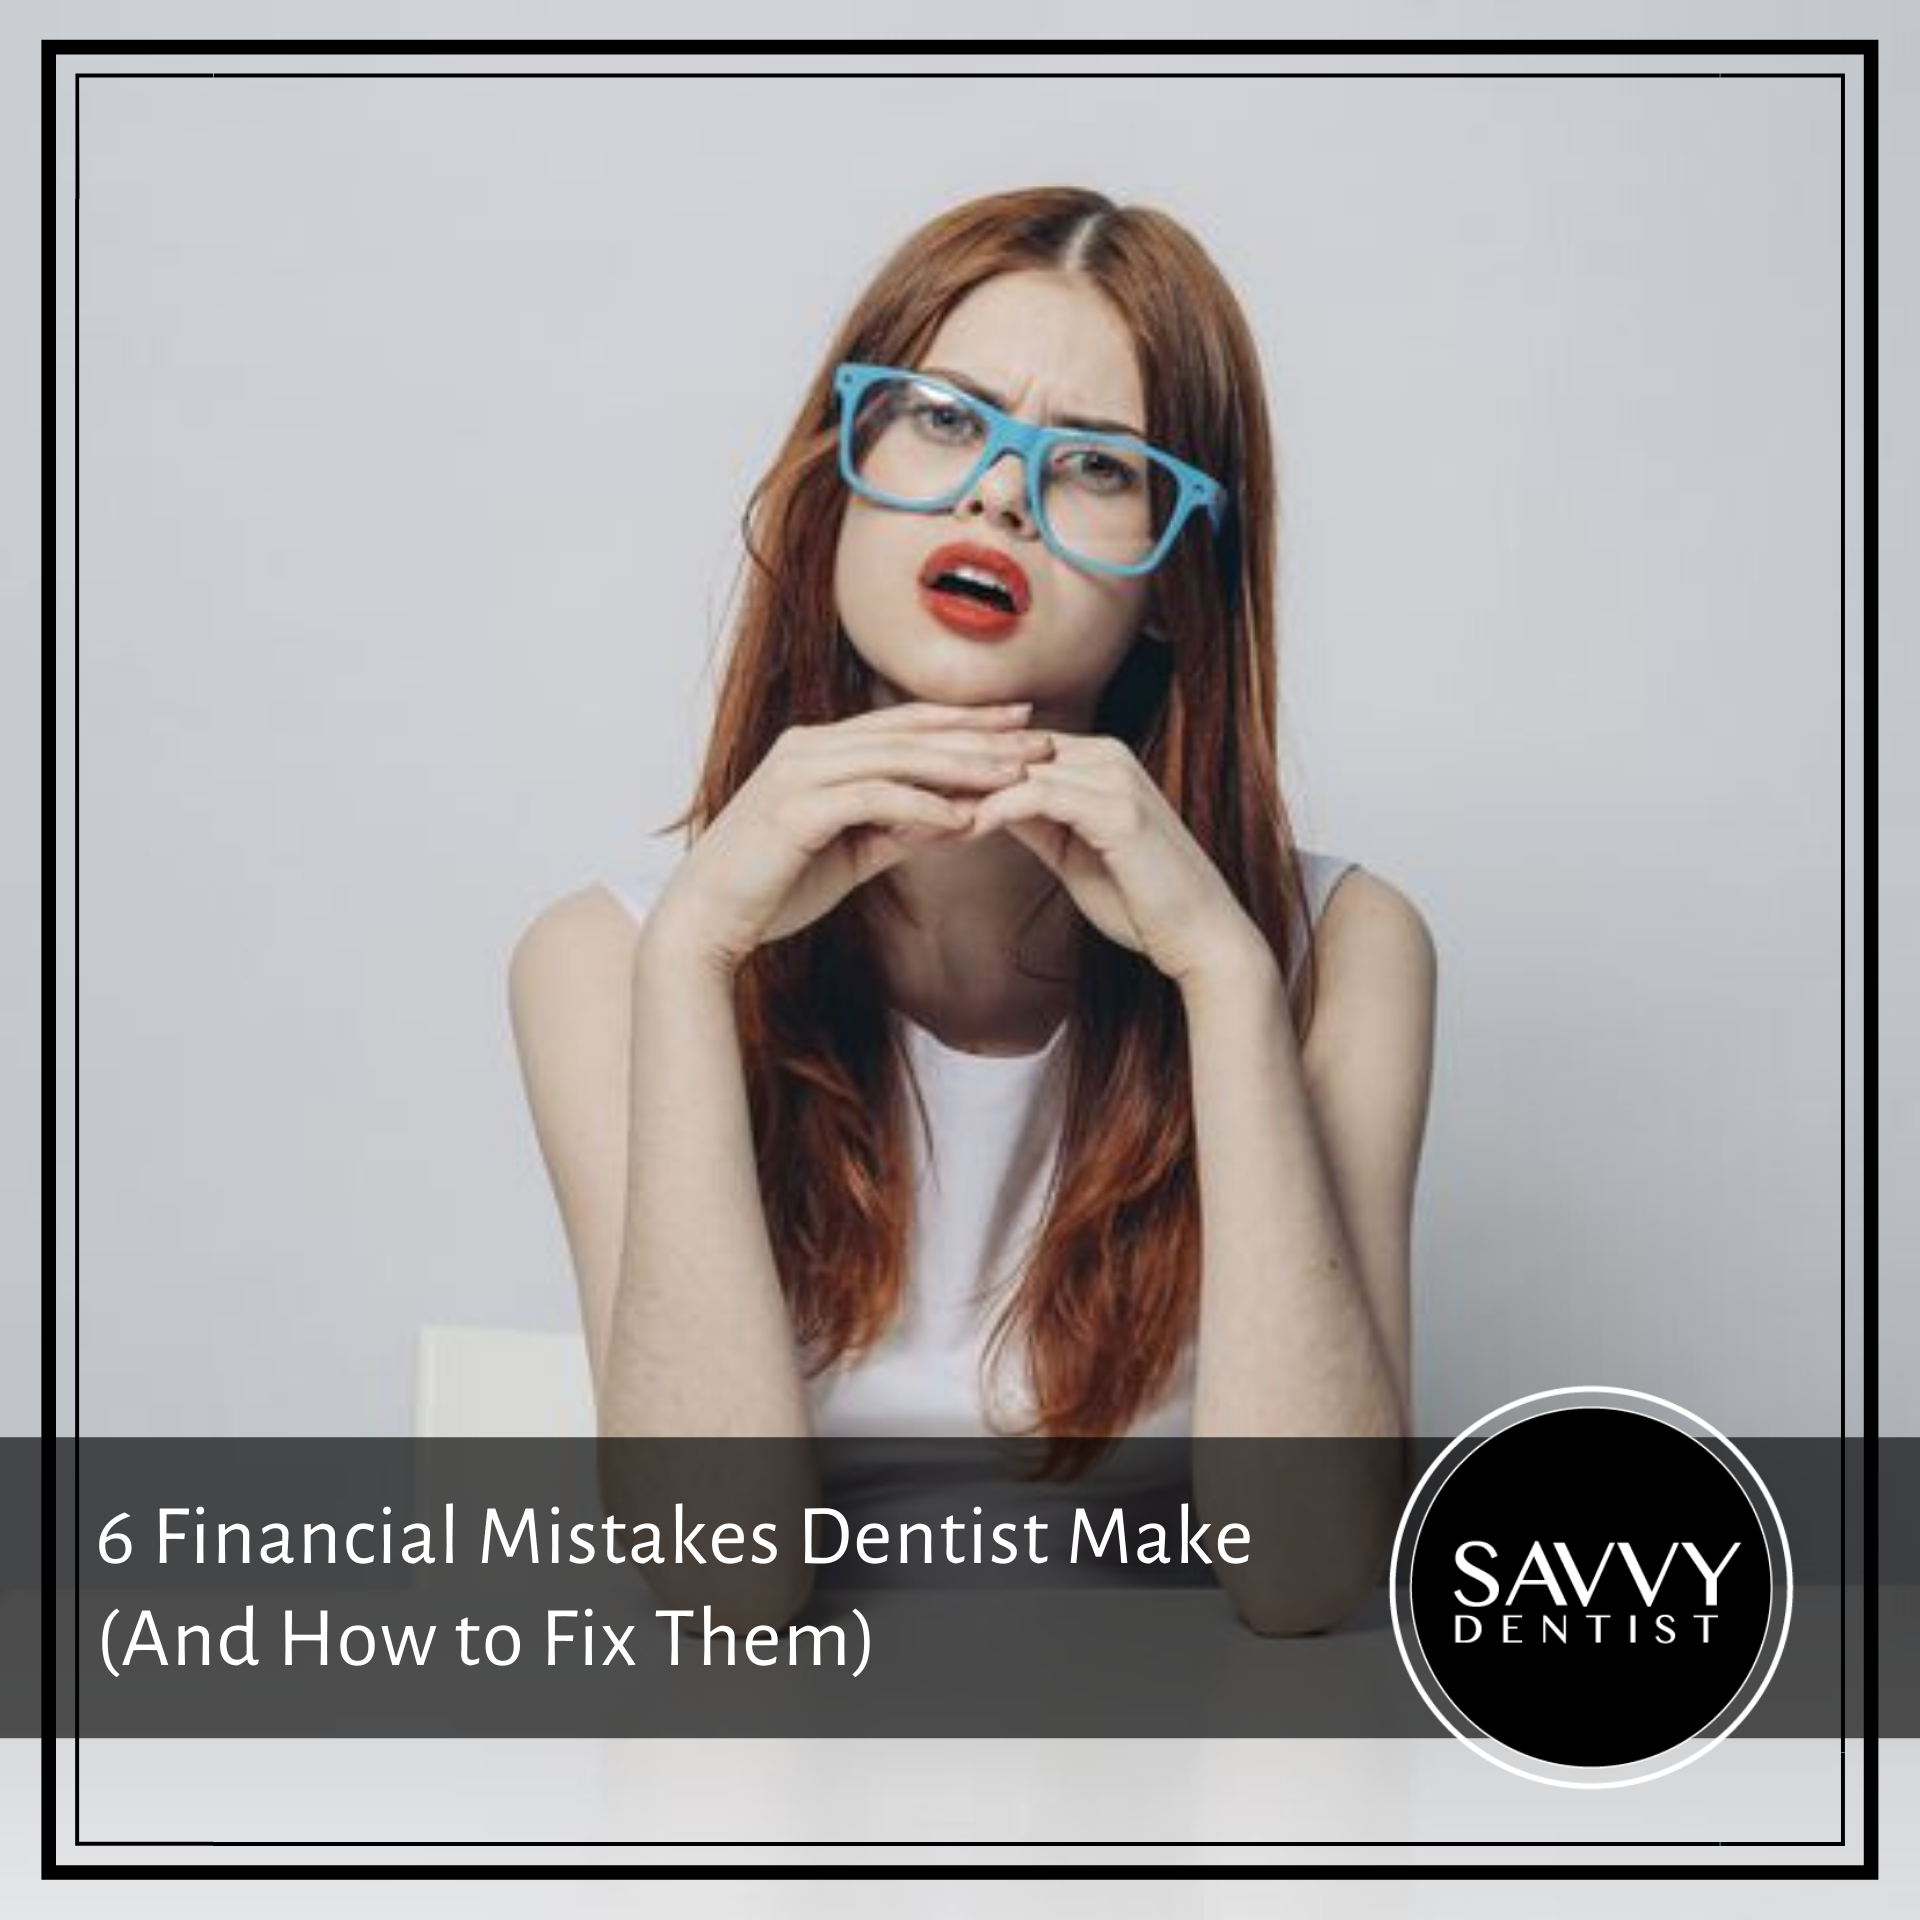 6 Financial Mistakes Dentists Make (And How to Fix Them)